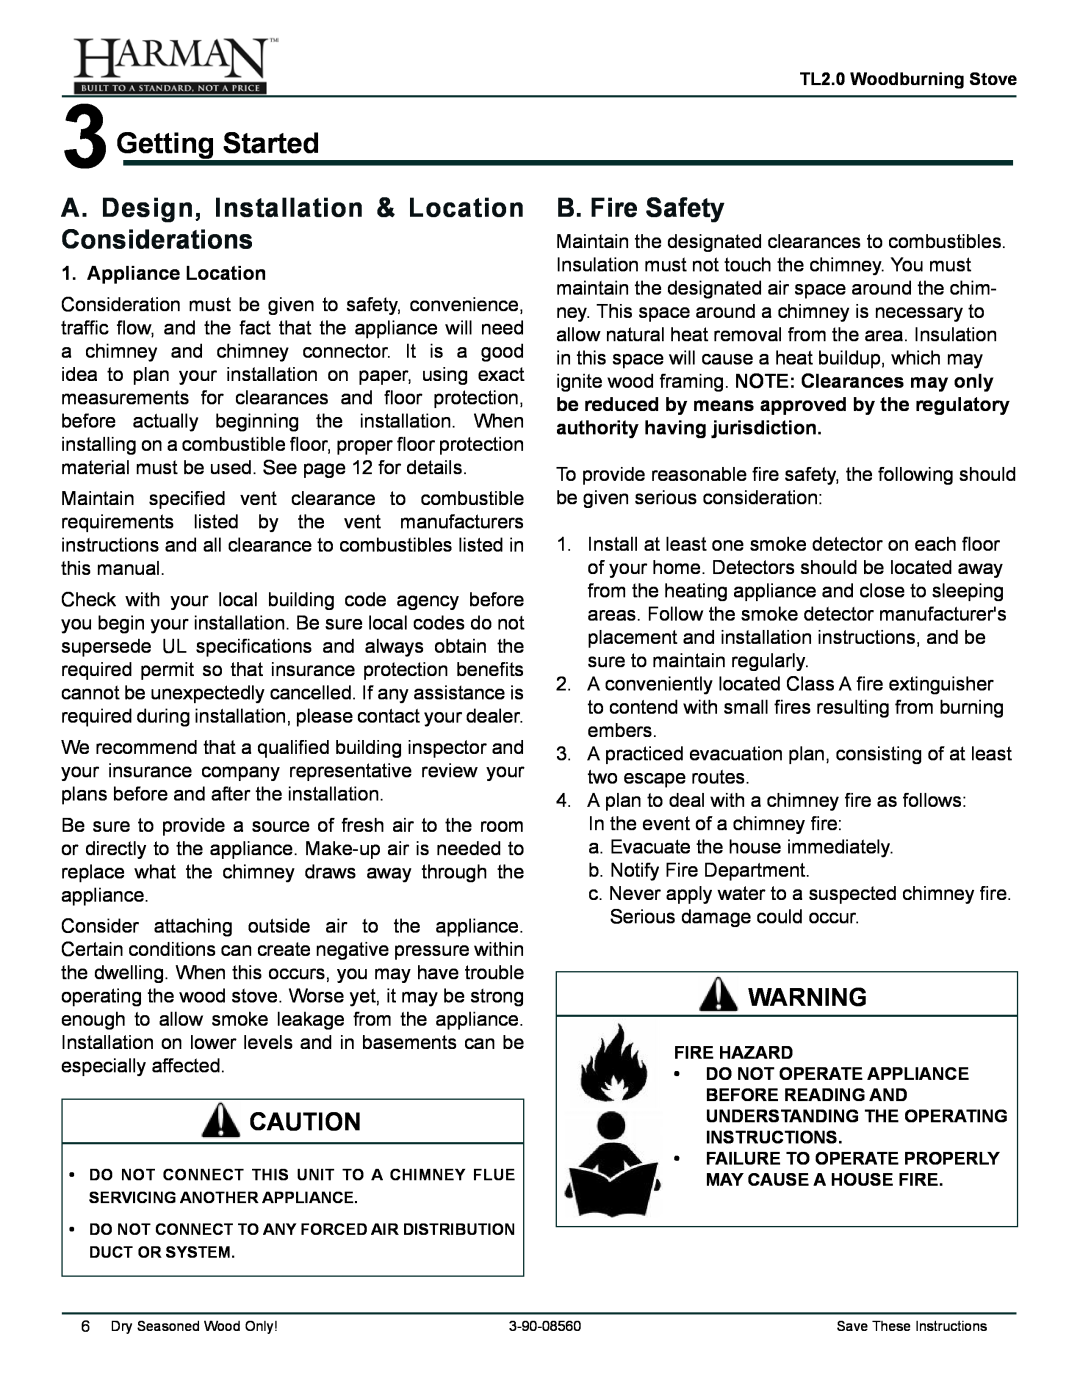 Harman Stove Company TL2.0 manual 3Getting Started, A. Design, Installation & Location Considerations, B. Fire Safety 